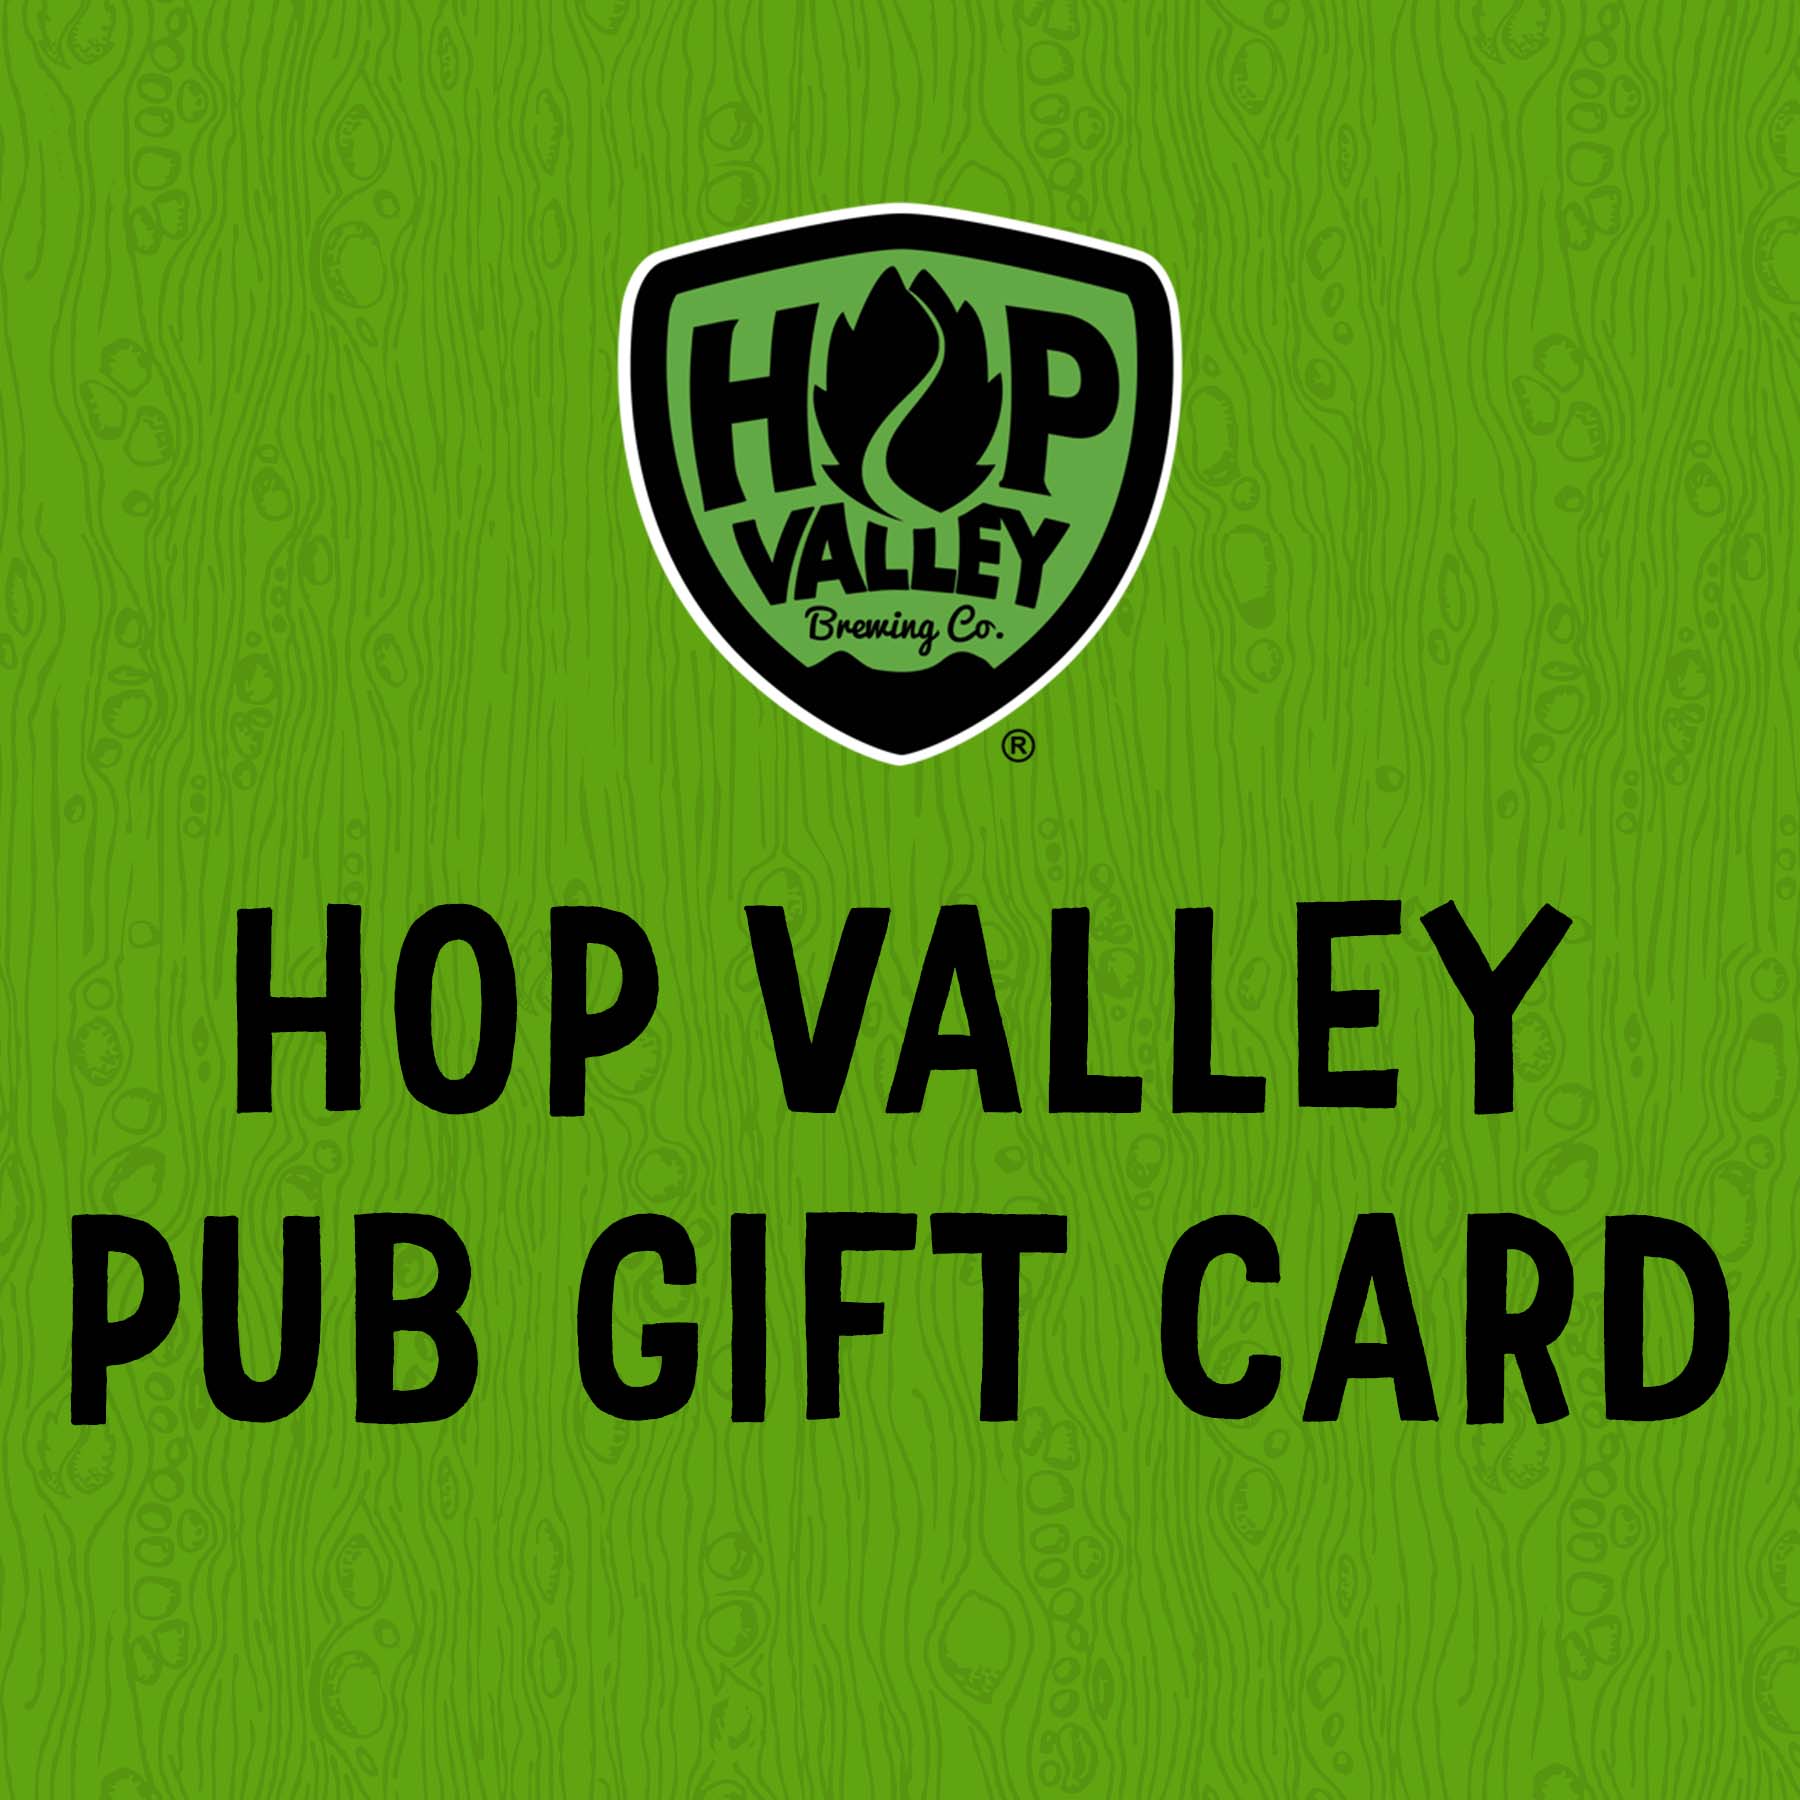 Hop Valley Pub Gift Card